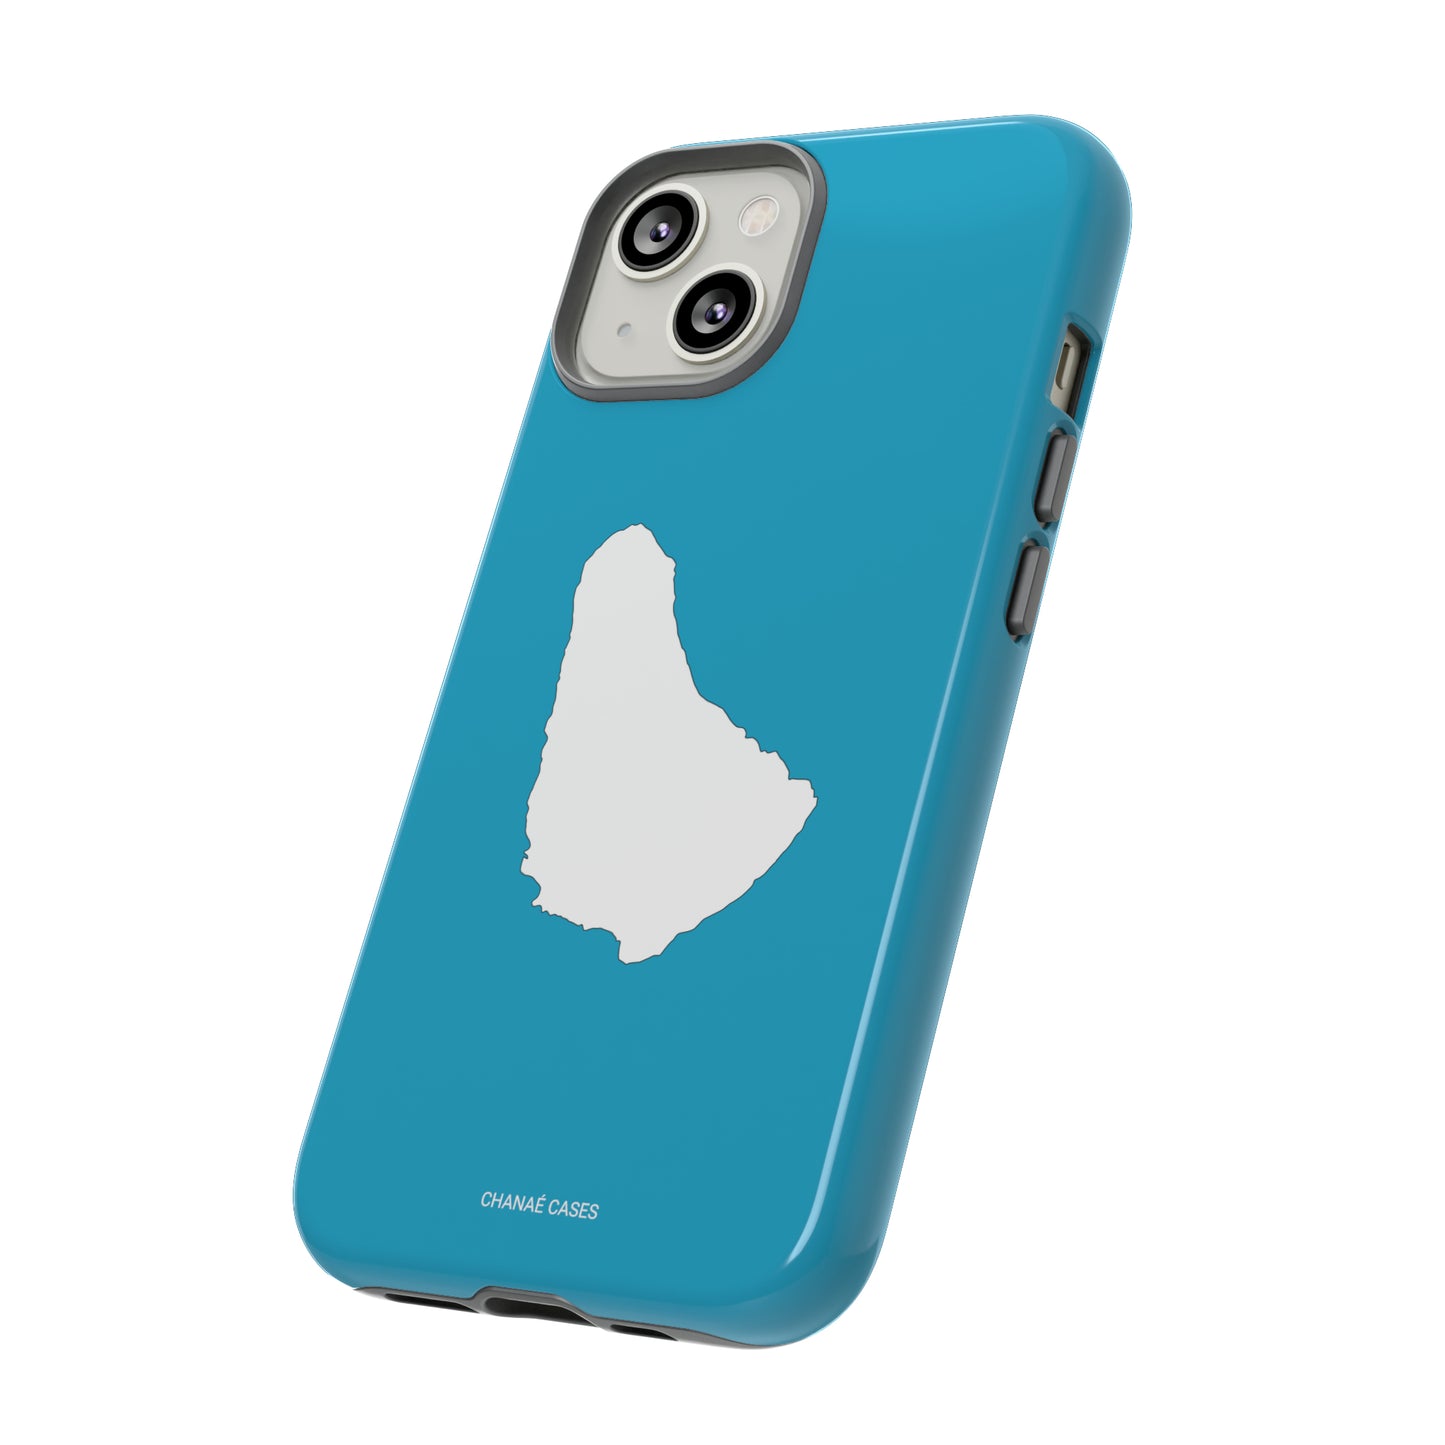 MOB iPhone "Tough" Case (Turquoise)